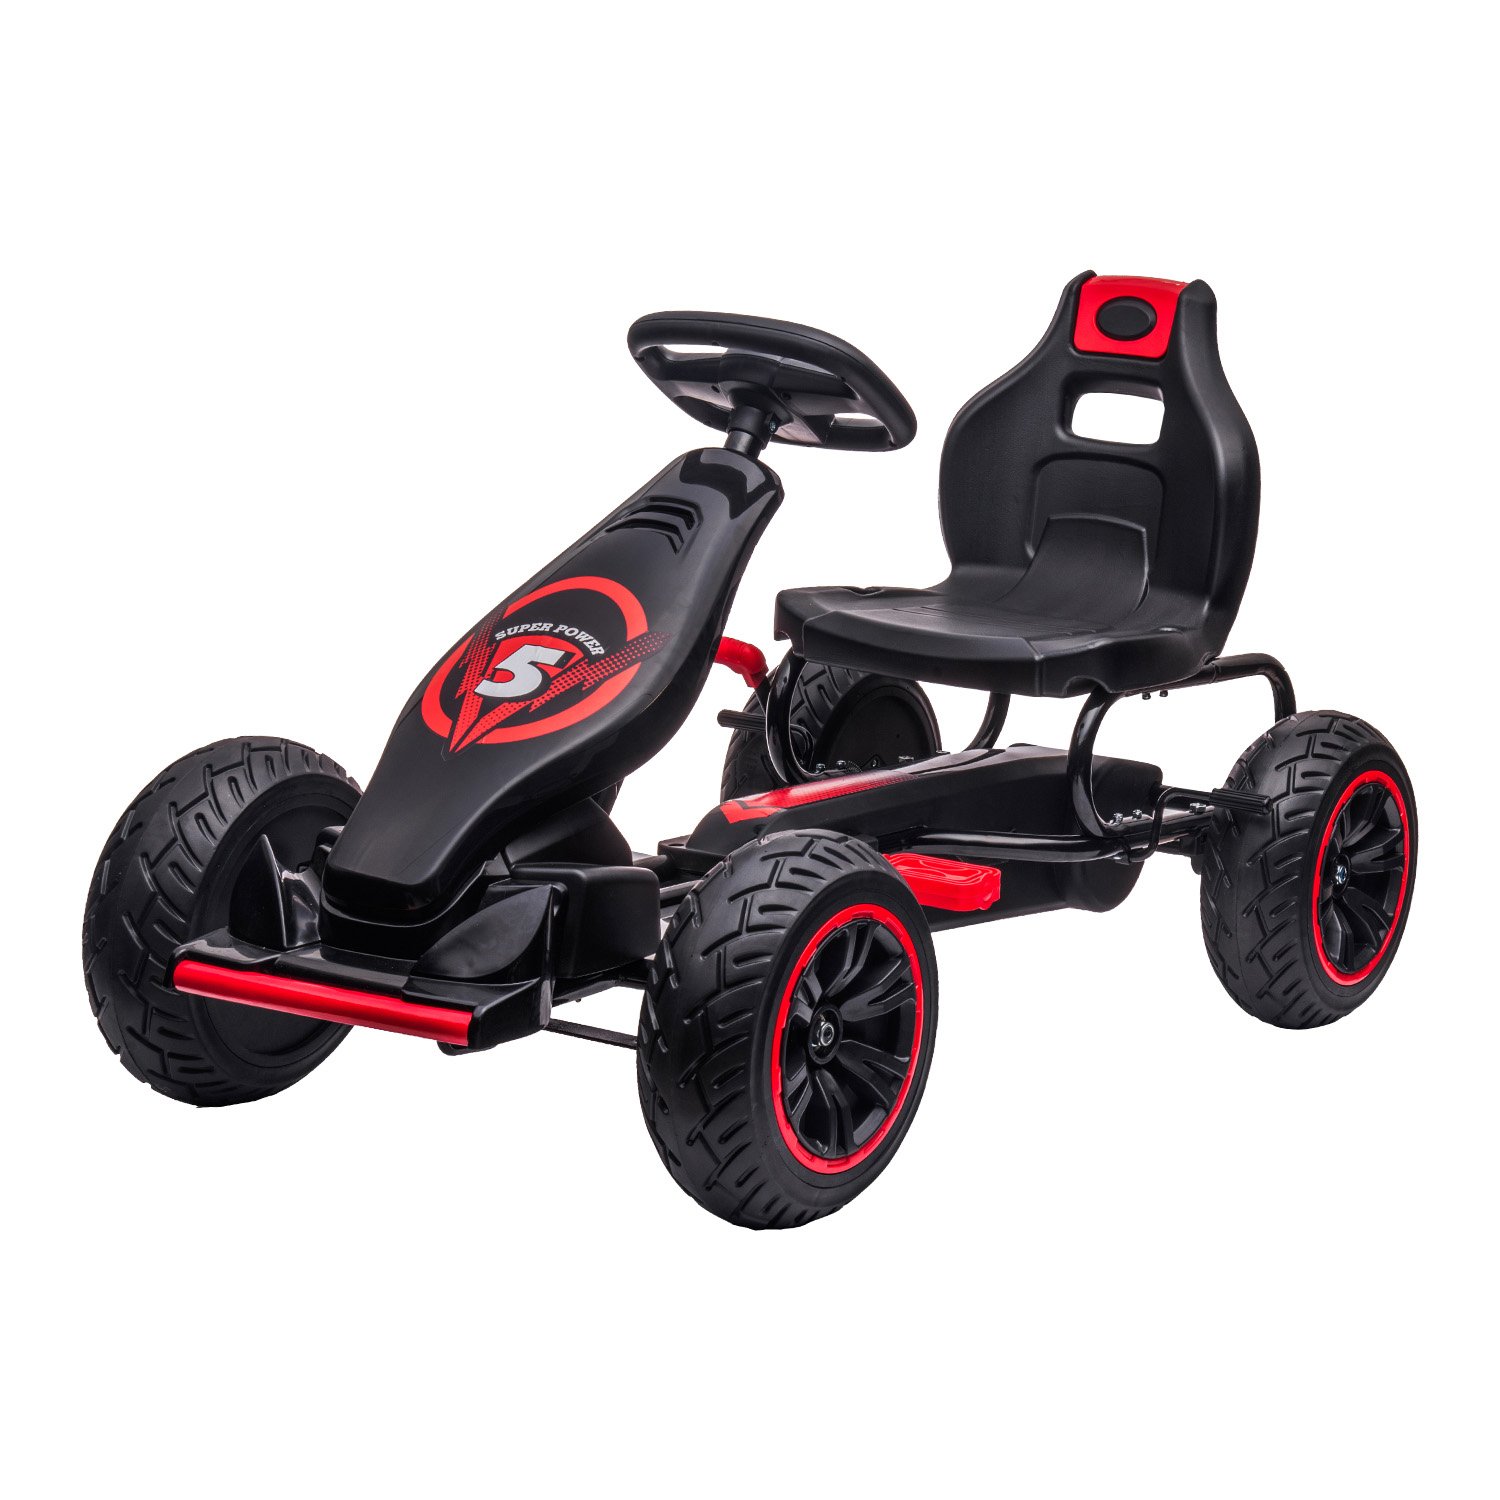 Kahuna G18 Kids Ride On Pedal Powered Go Kart Racing Style - Red 2